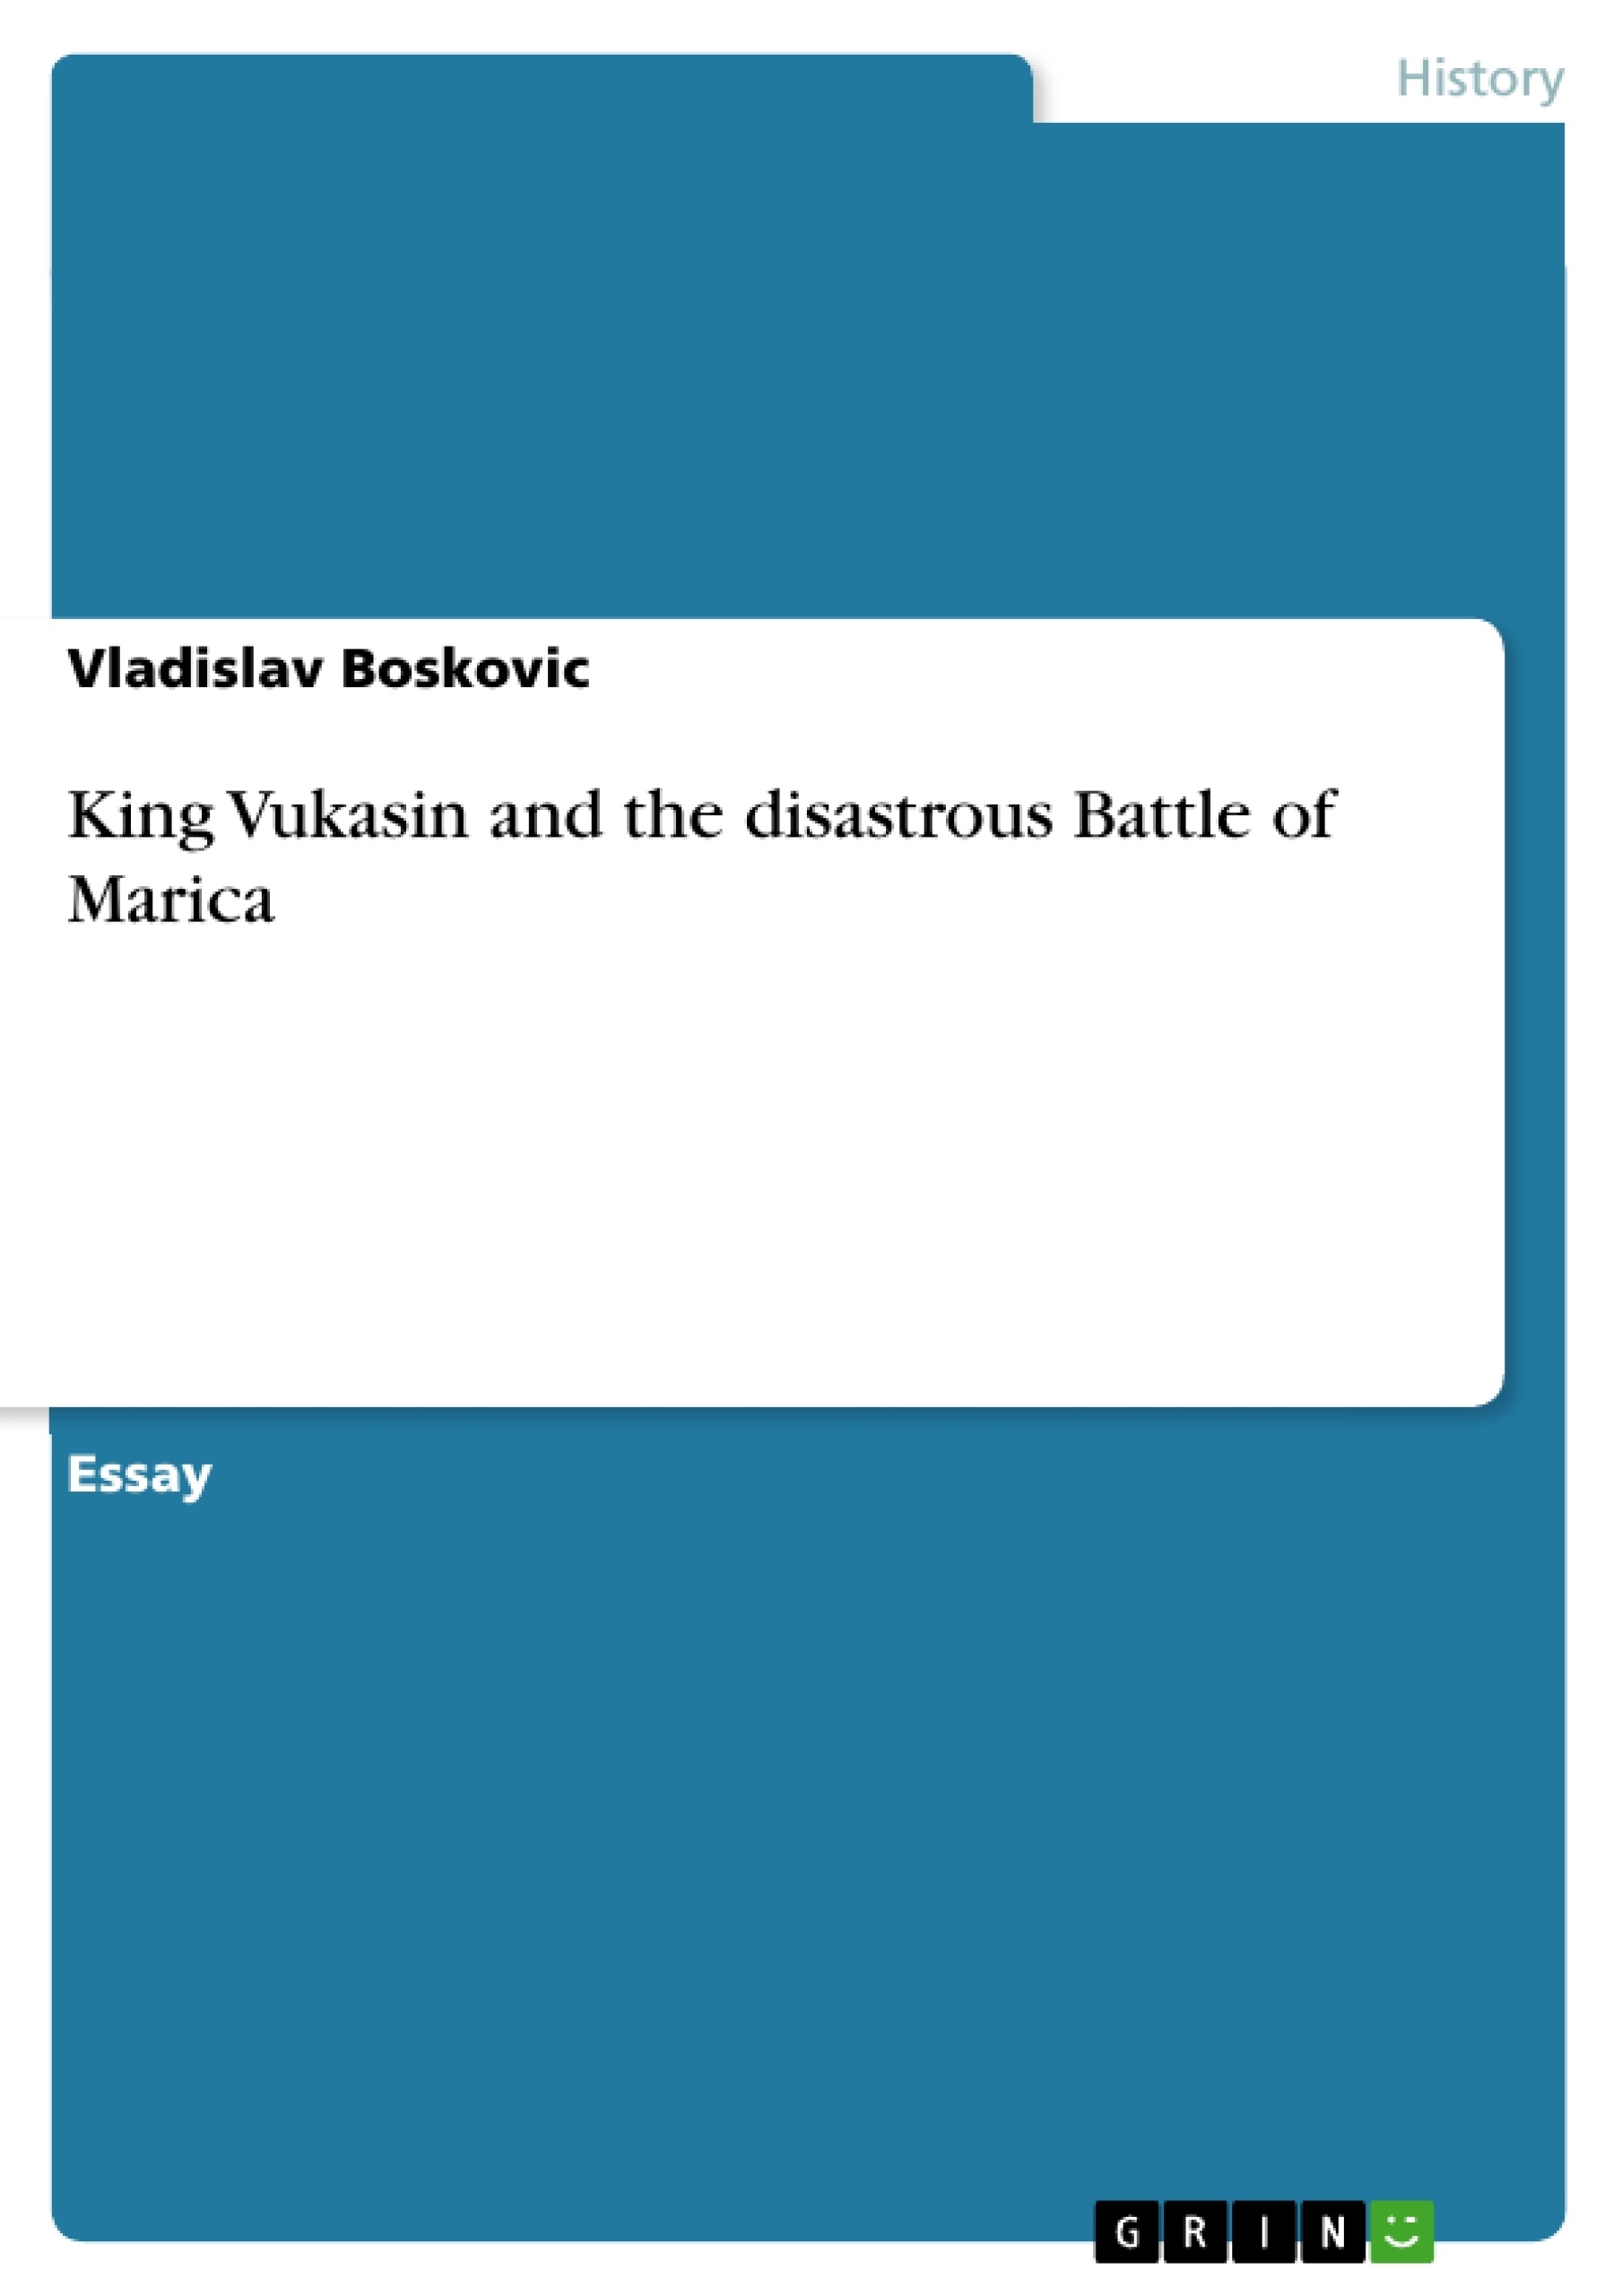 Title: King Vukasin and the disastrous Battle of Marica